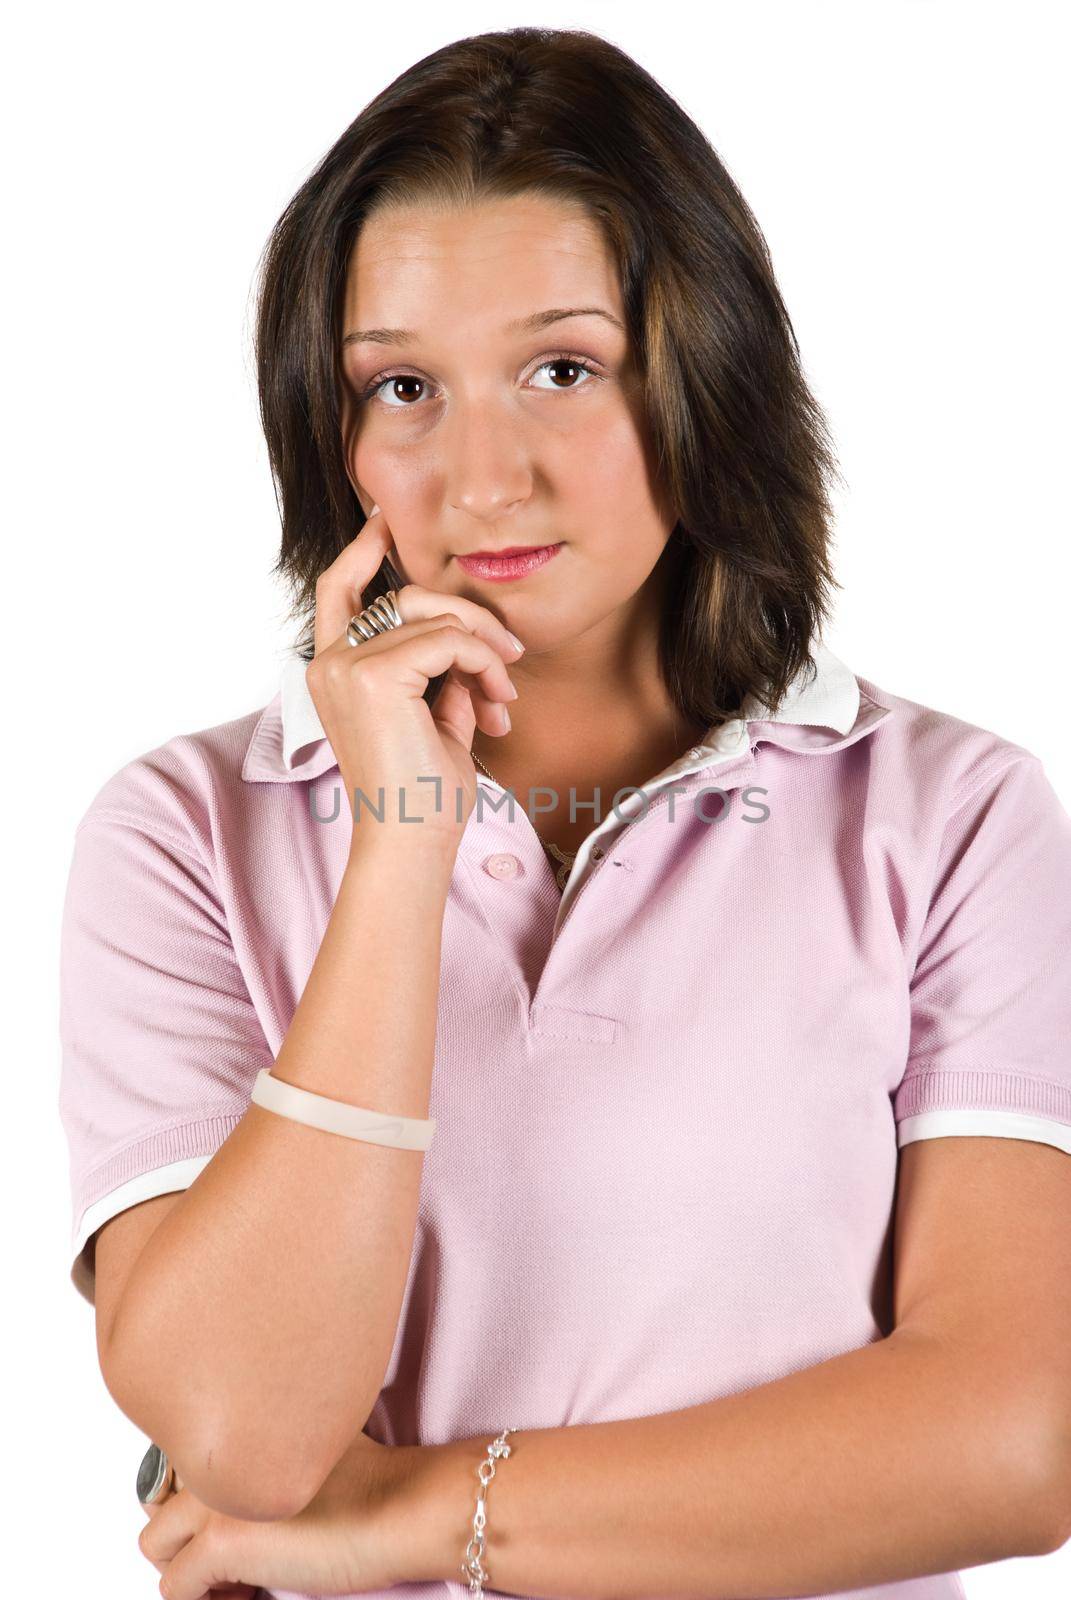 Sad teenager female looking at you and standing with hand to chin isolated on white background